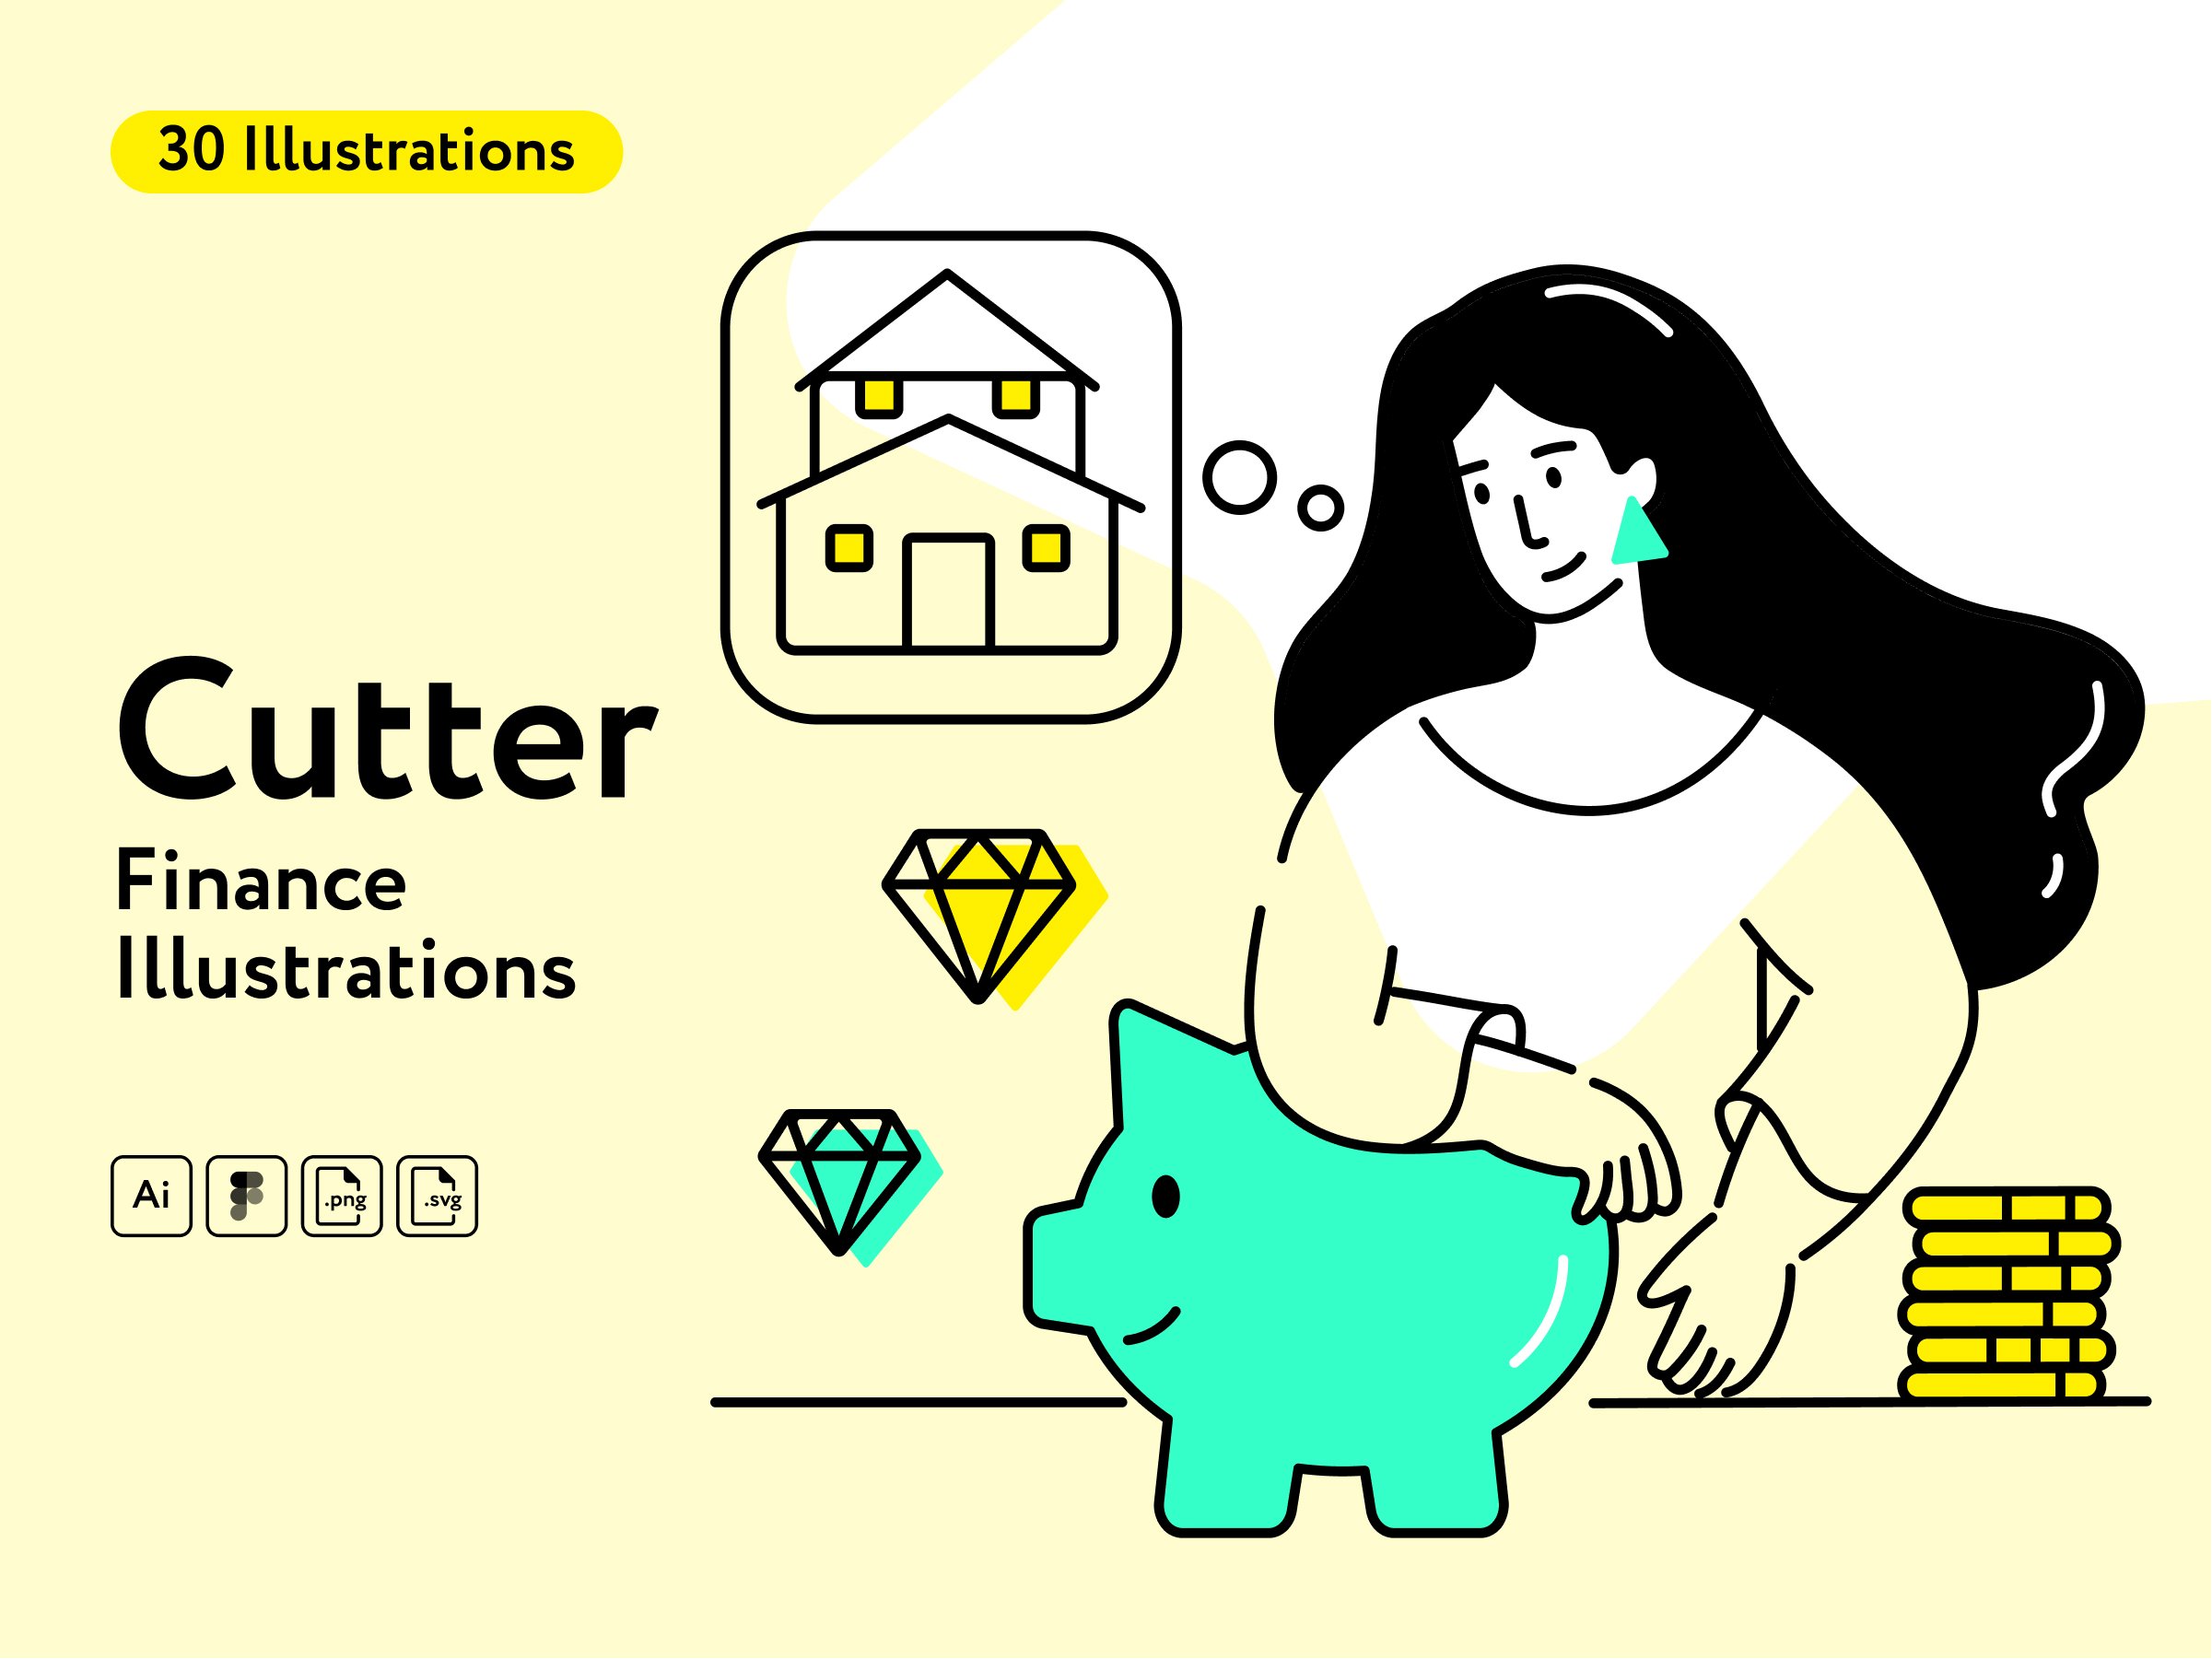 Cutter Finance Illustrations cover image.